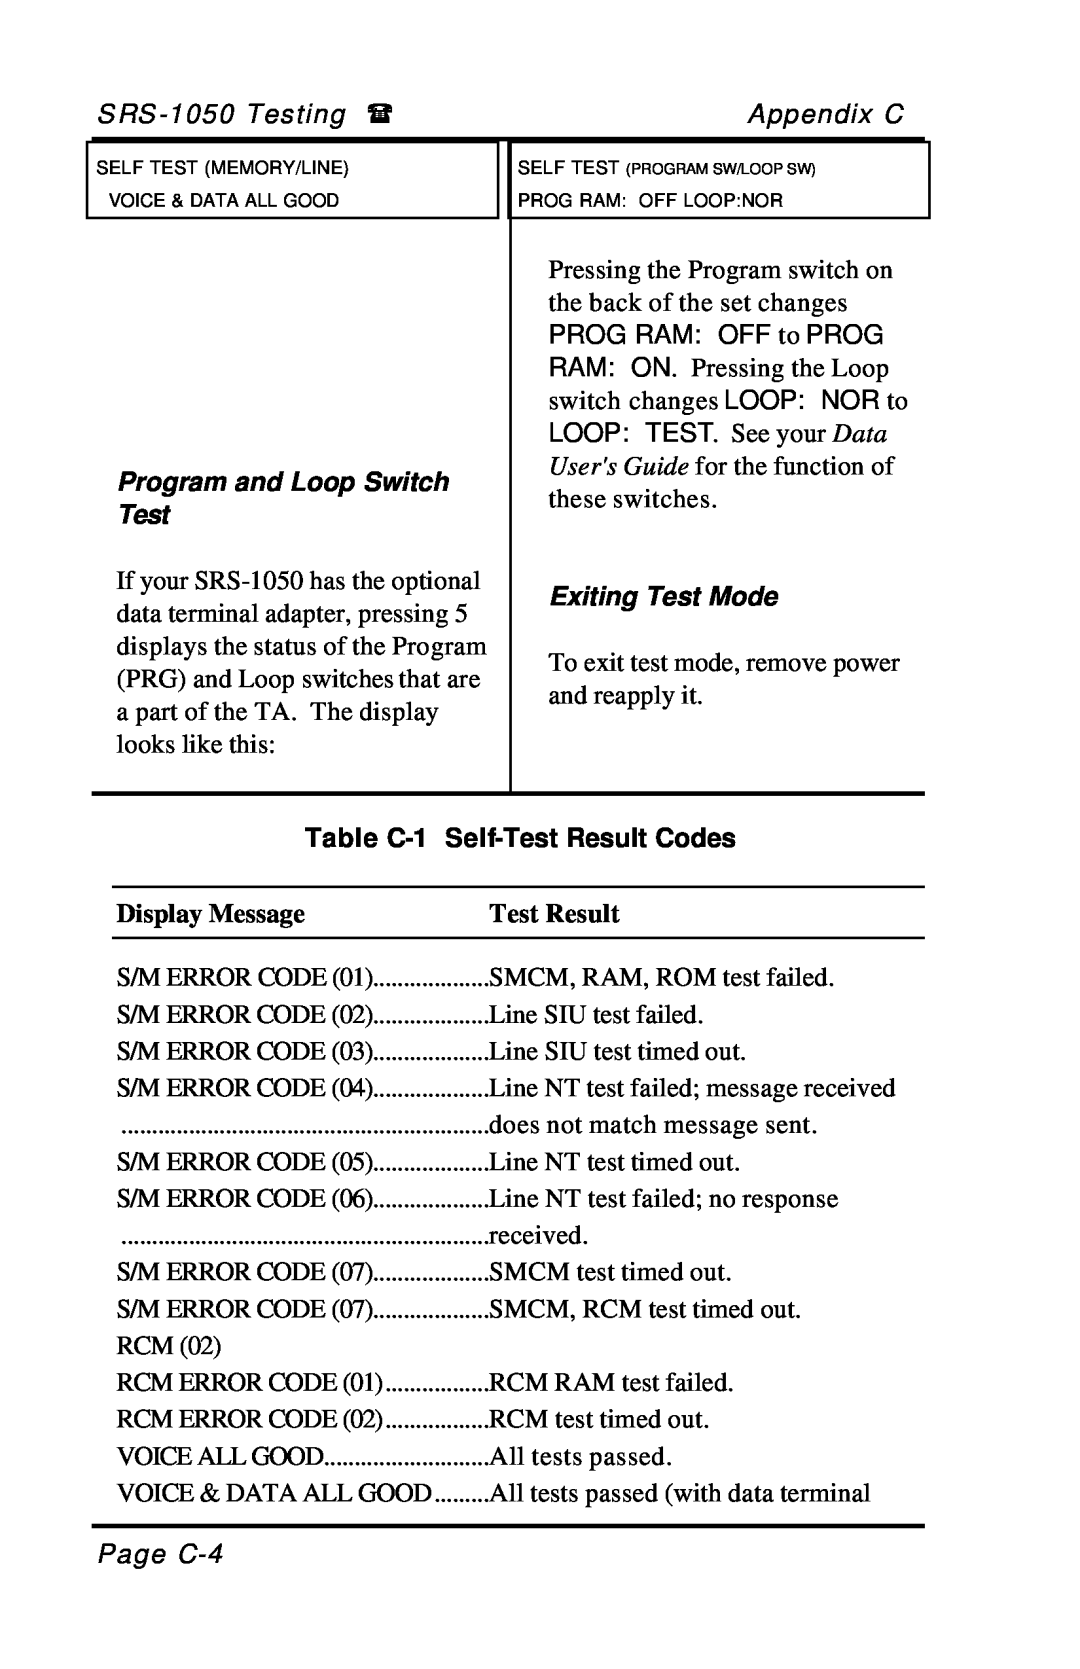 Fujitsu SRS-1050 manual Program and Loop Switch Test, Exiting Test Mode, Table C-1, Self-Test Result Codes, Display Message 